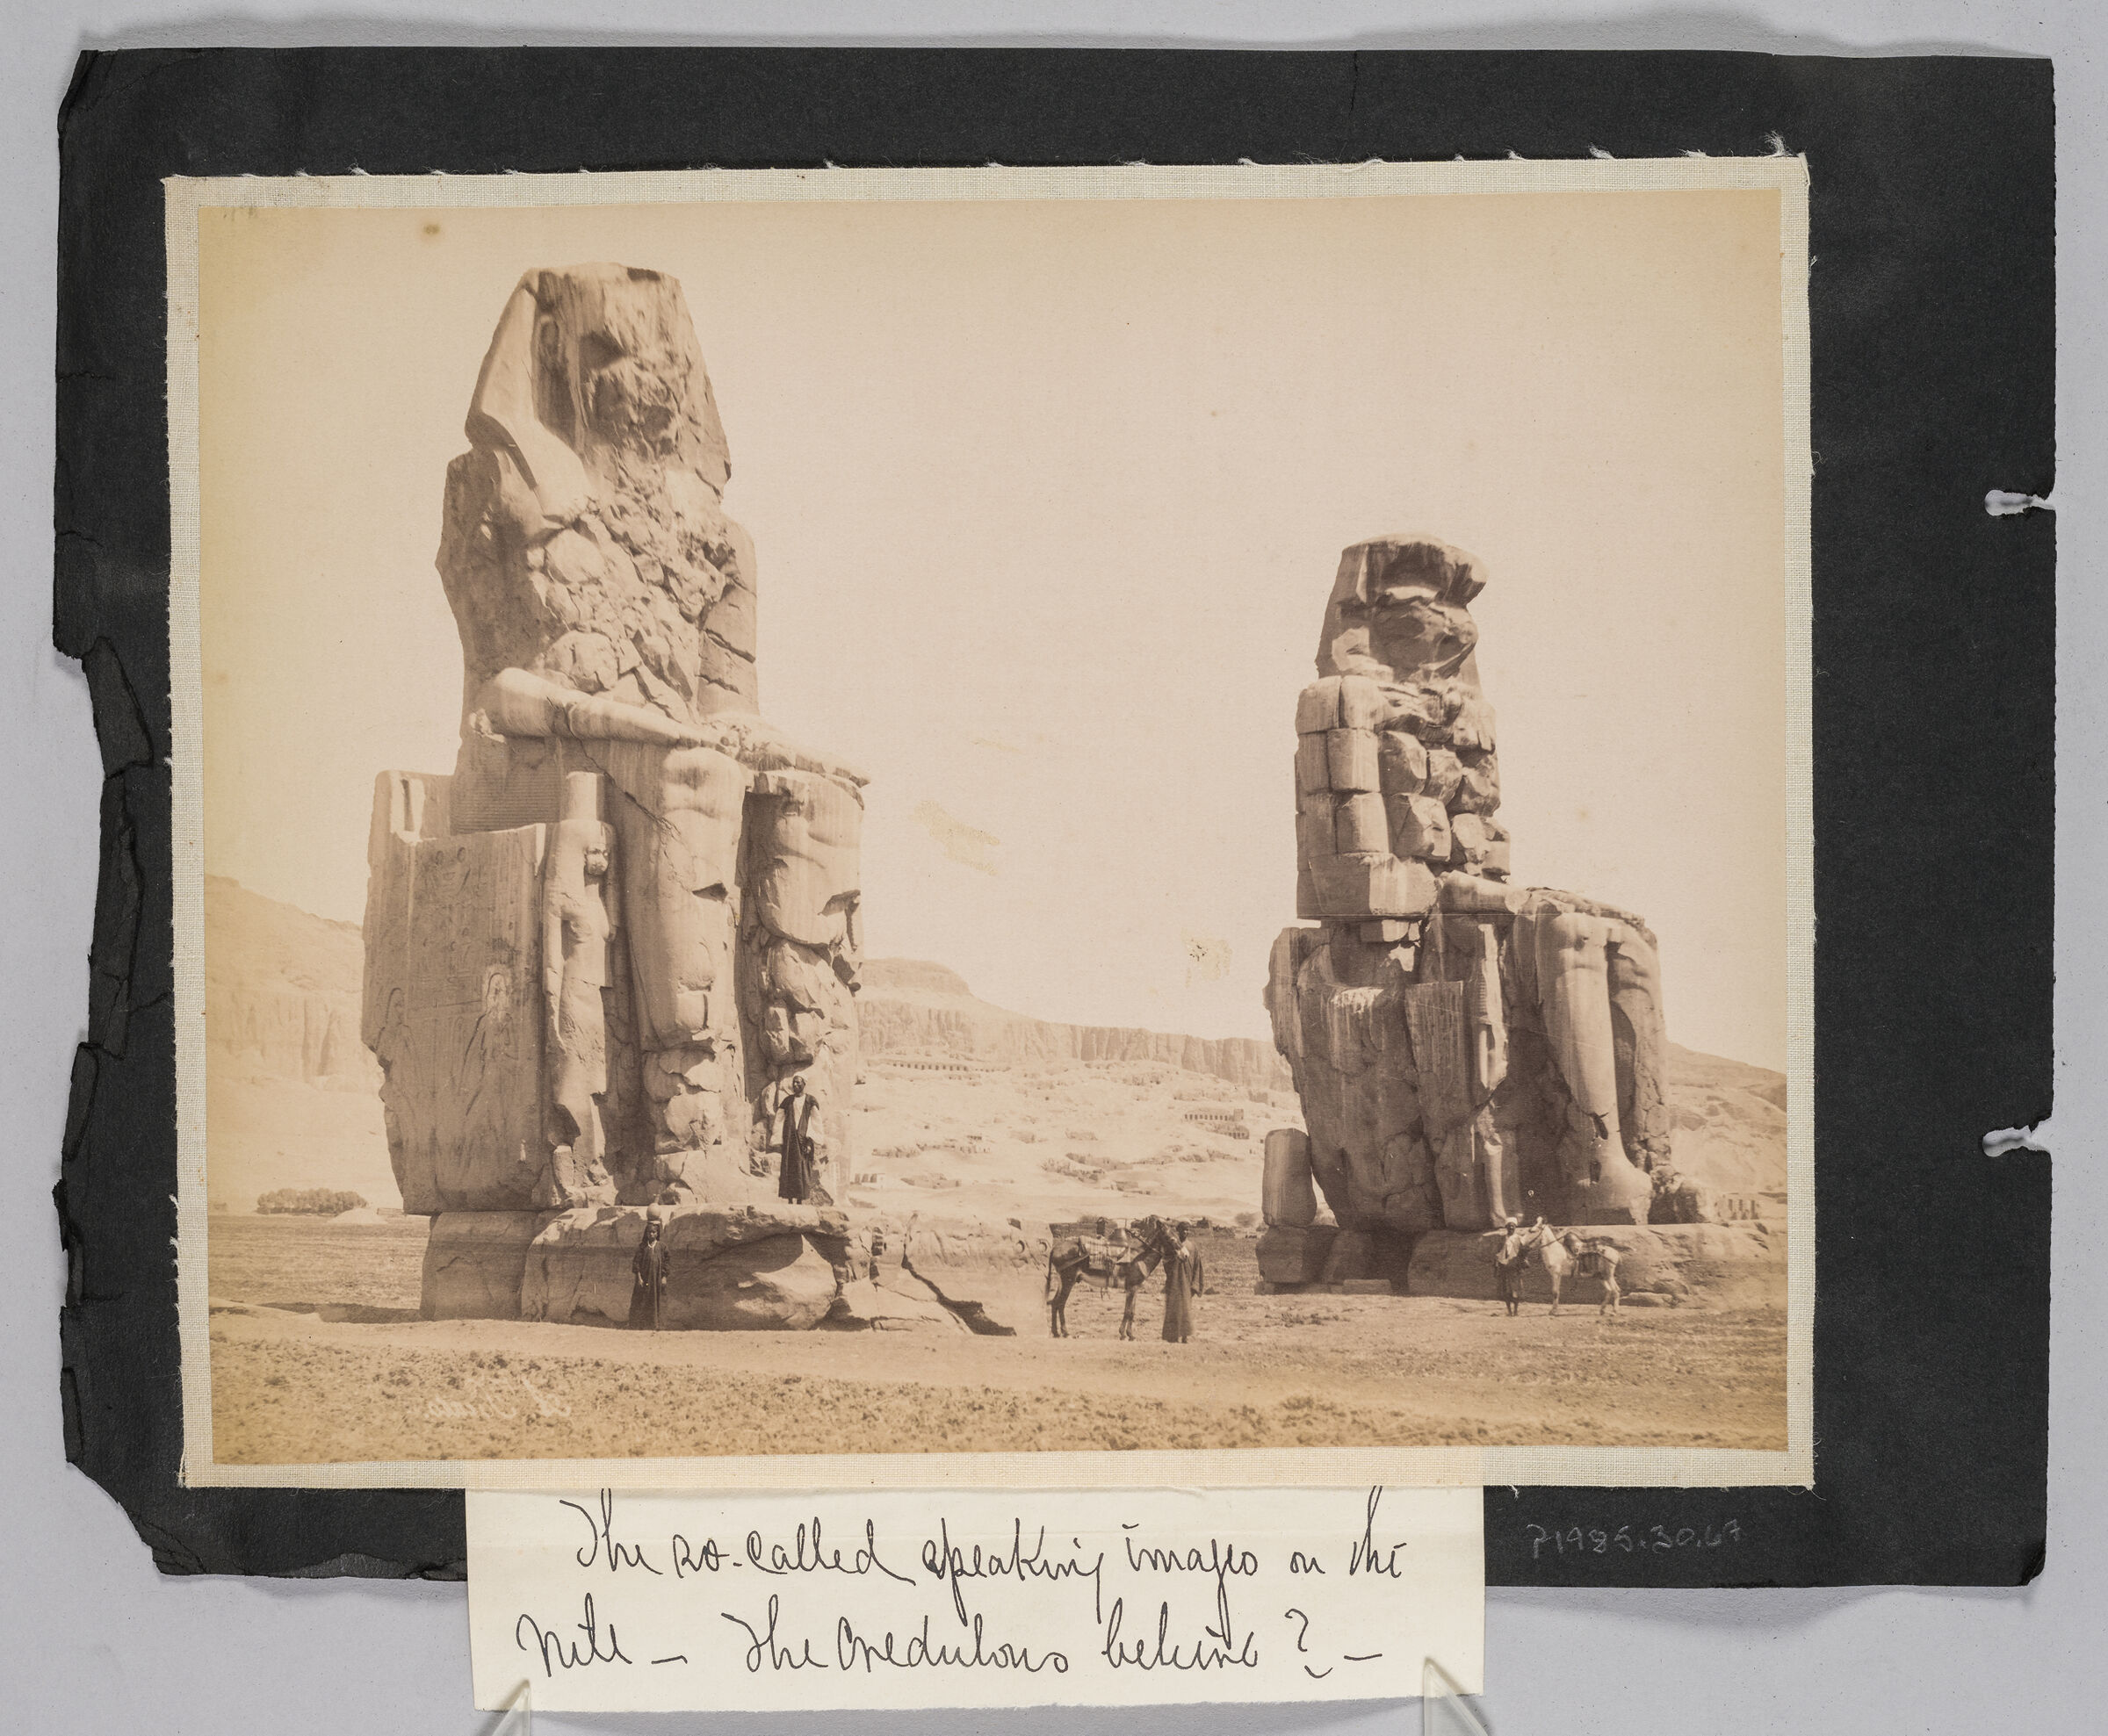 Untitled (Speaking Statues On The Nile)